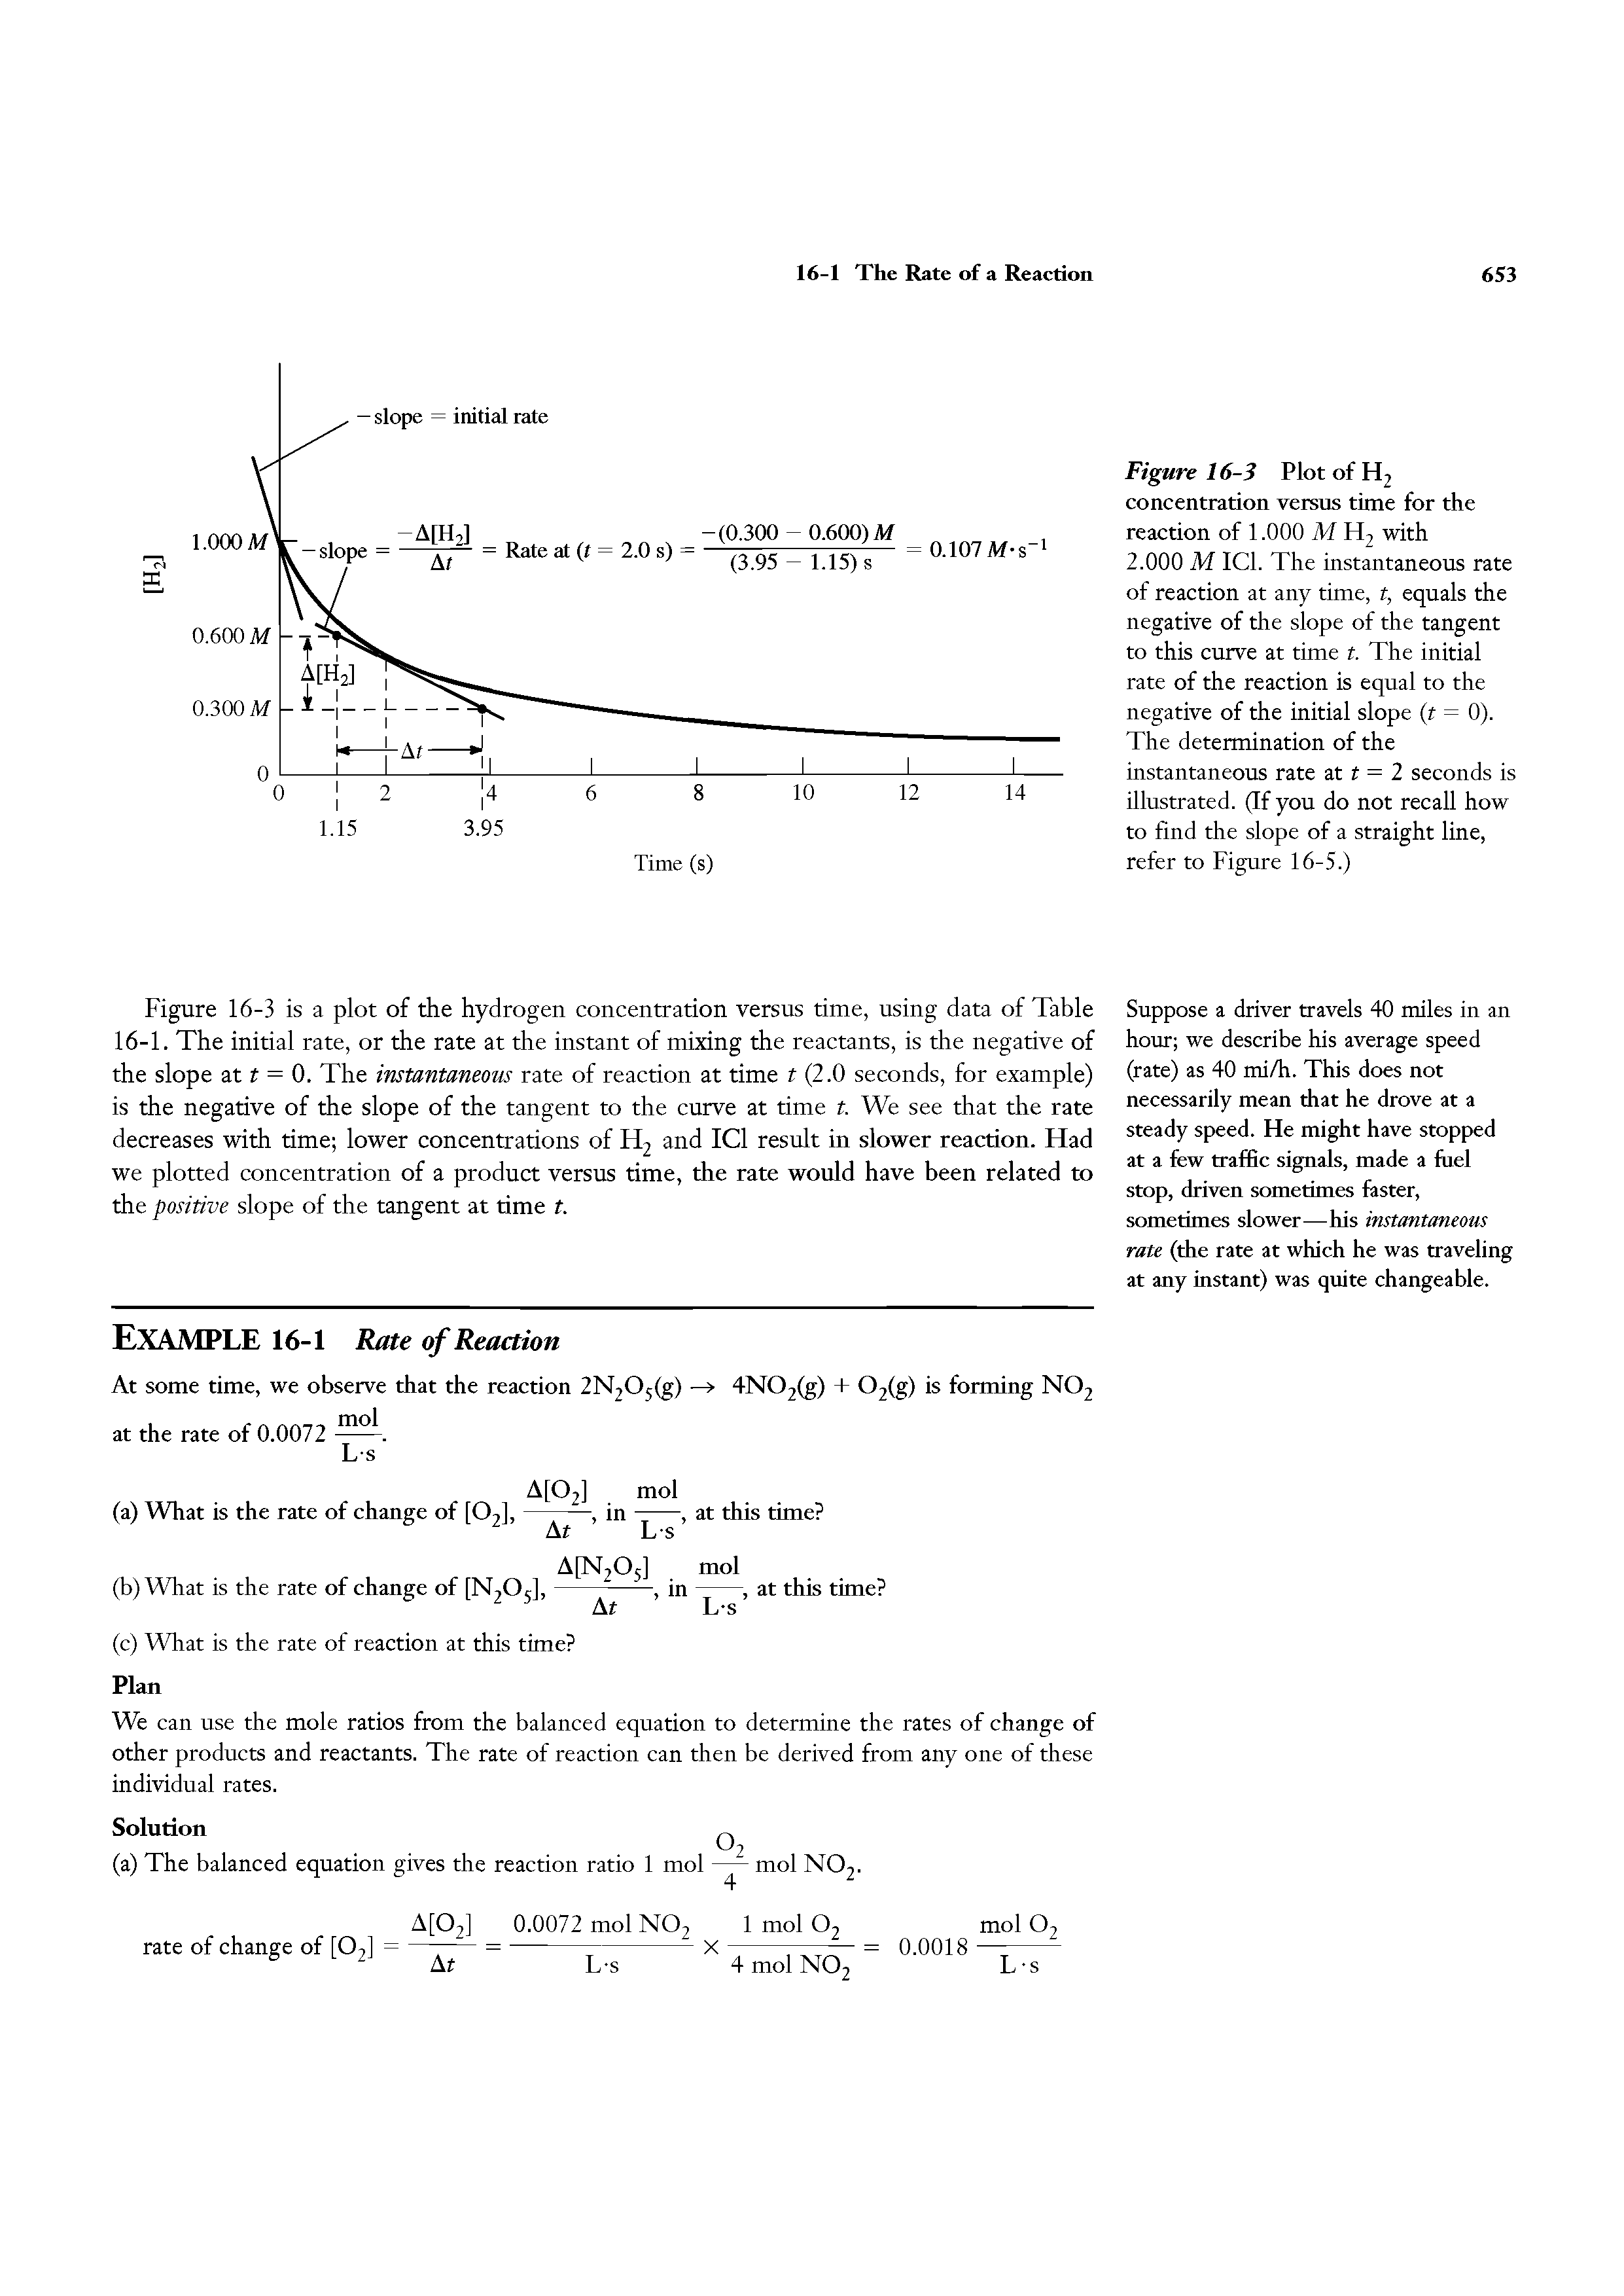 Figure 16-3 Plot of H2 concentration versus time for the reaction of 1.000 M H2 with 2.000 M ICl. The instantaneous rate of reaction at any time, t, equals the negative of the slope of the tangent to this curve at time t. The initial rate of the reaction is equal to the negative of the initial slope (t = 0). The determination of the instantaneous rate at t = 2 seconds is illustrated. (If you do not recall how to find the slope of a straight line, refer to Figure 16-5.)...